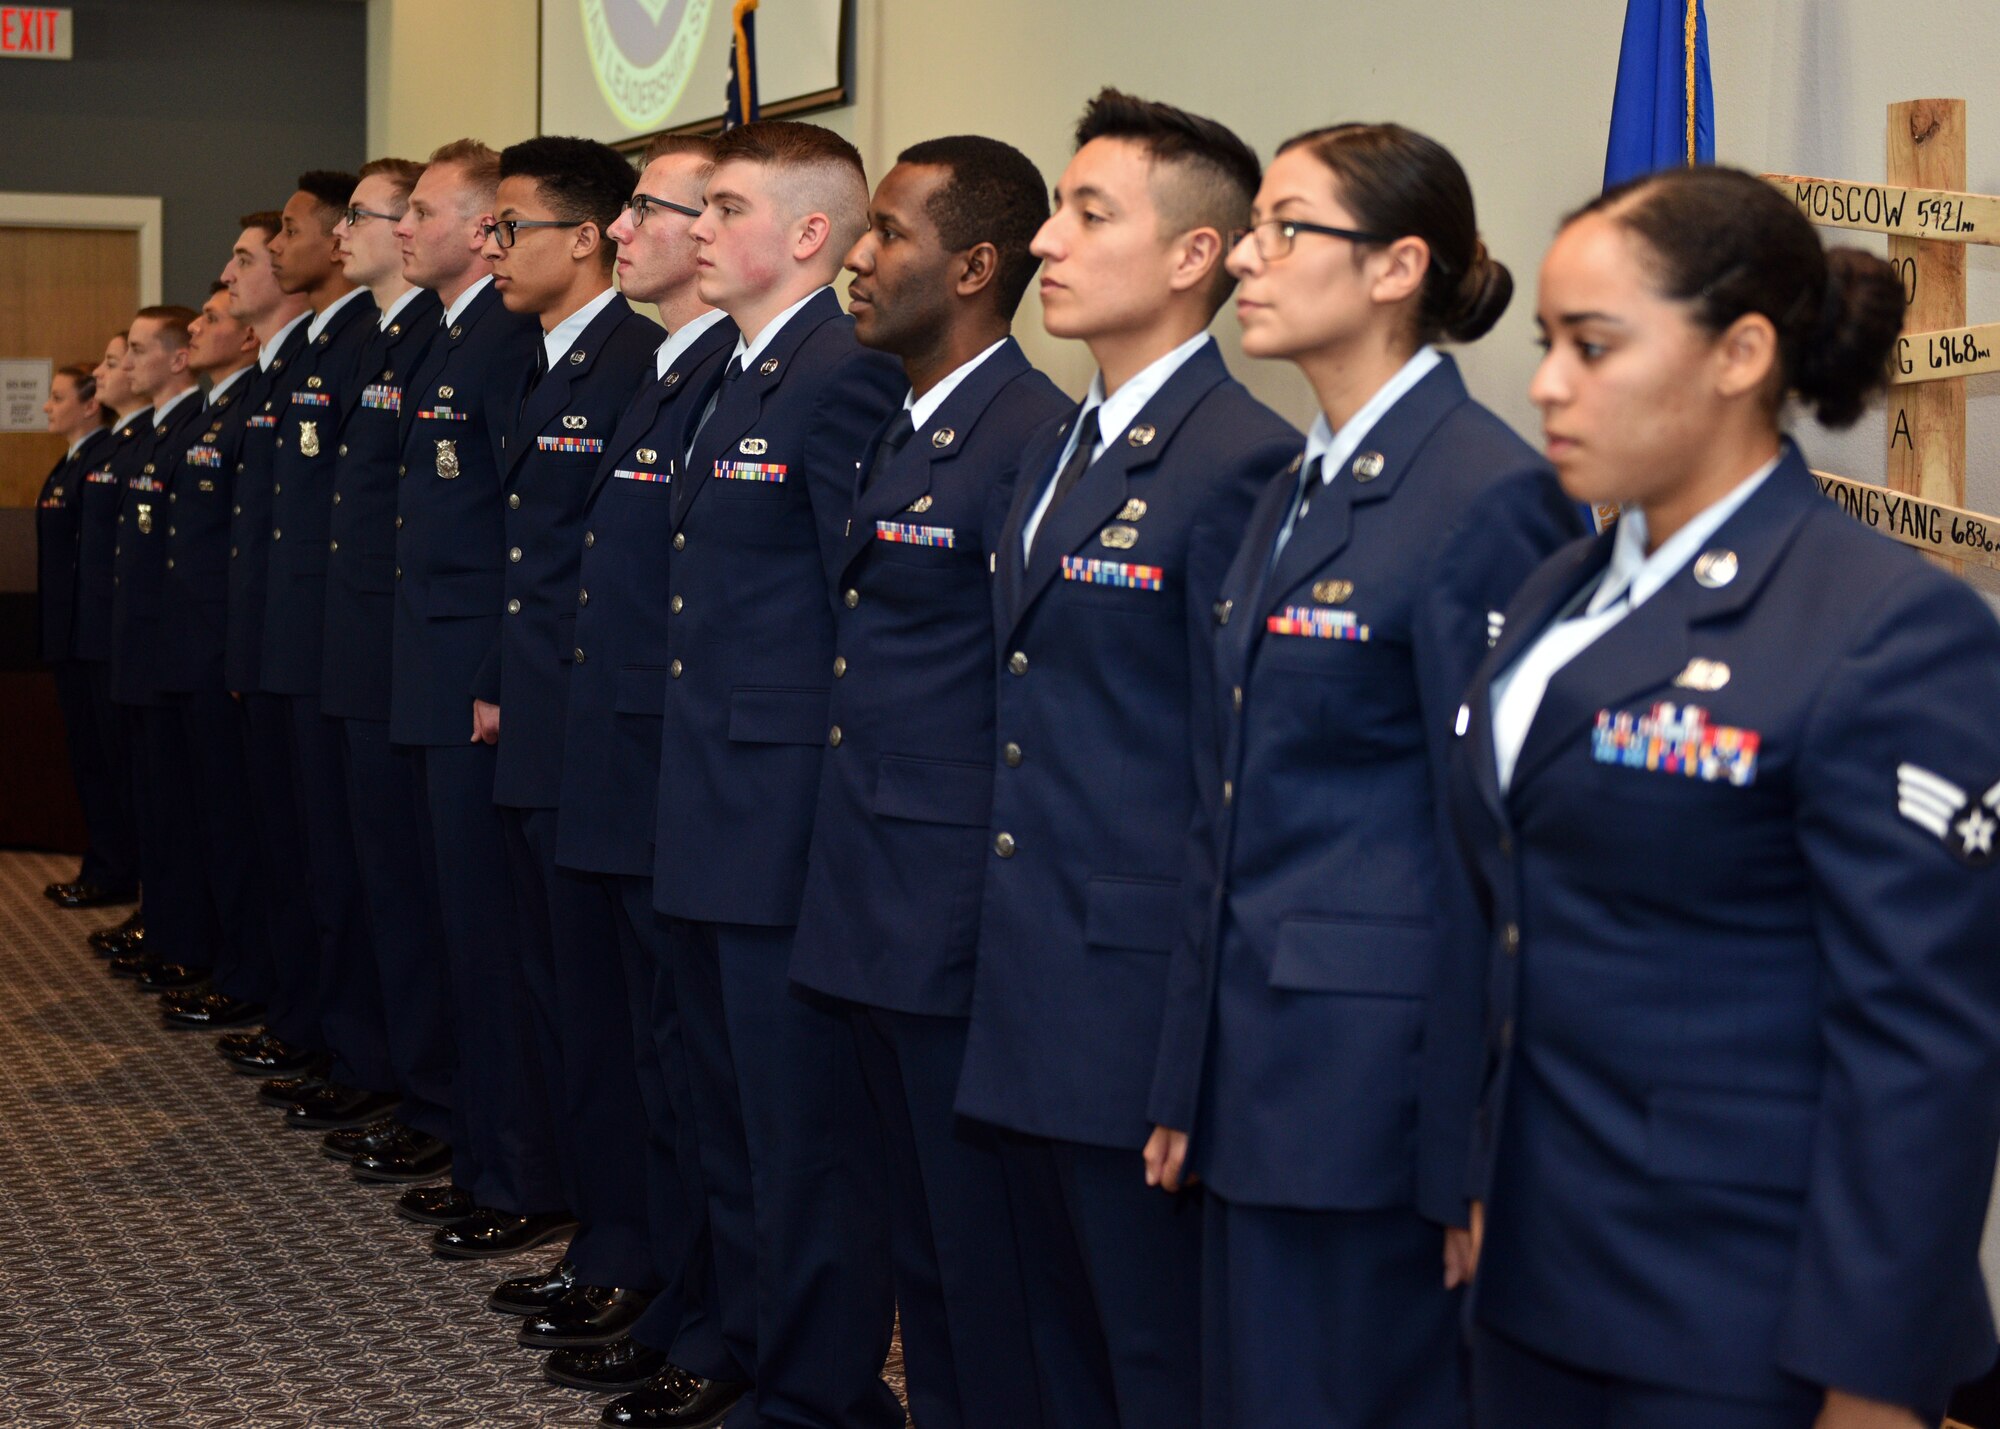 Graduates of Airman Leadership School Class 20-A prepare to sing the Air Force Song during the ALS Graduation ceremony at the event center on Goodfellow Air Force Base, Texas, December 12, 2019. ALS is a four-week course designed to prepare senior airmen to assume supervisory duties. (U.S. Air Force photo by Airman 1st Class Robyn Hunsinger)